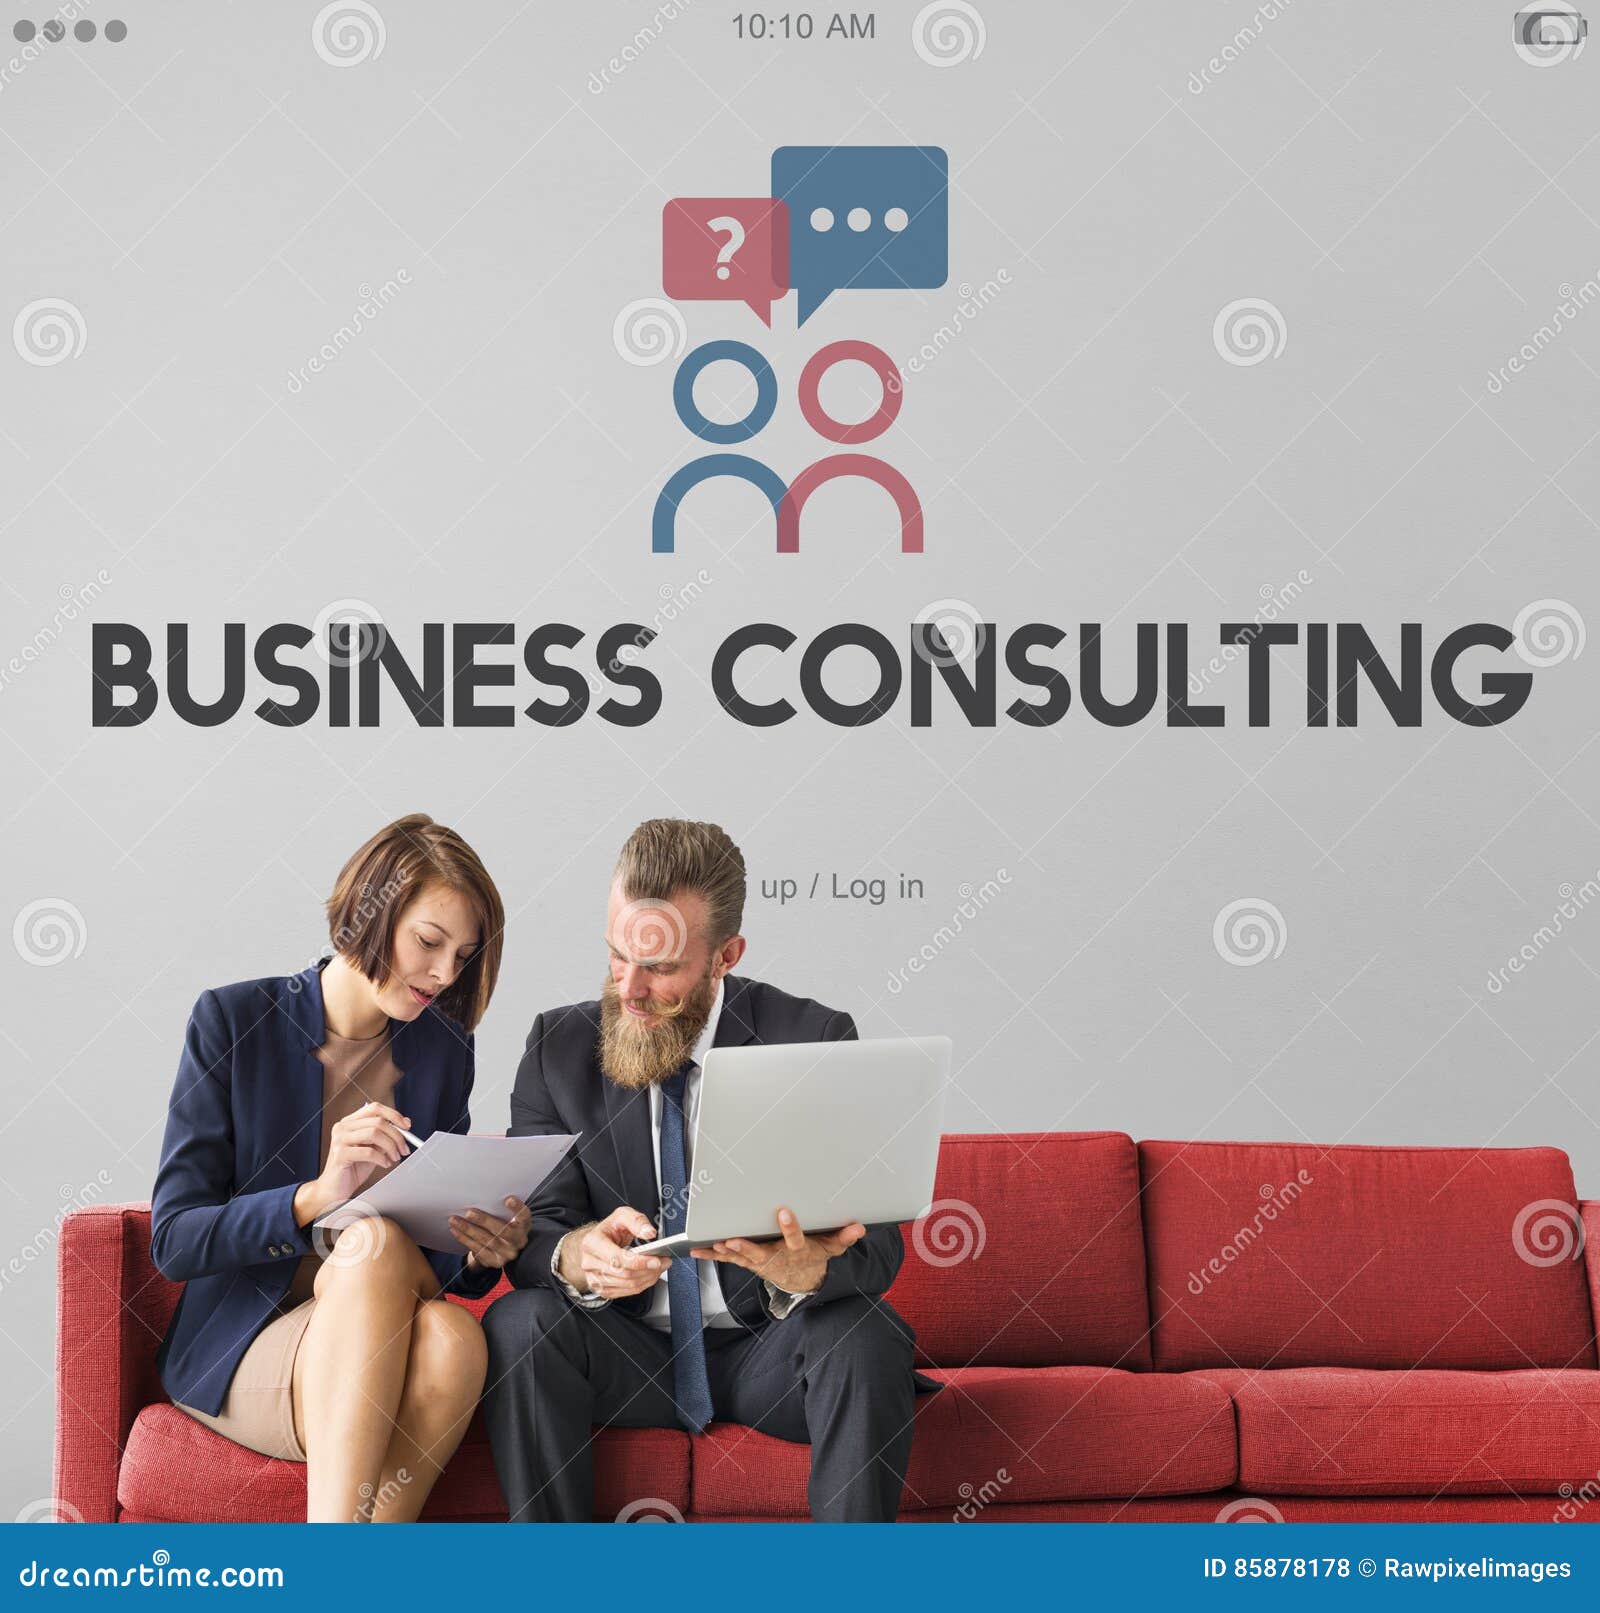 assistance business consulting experts services